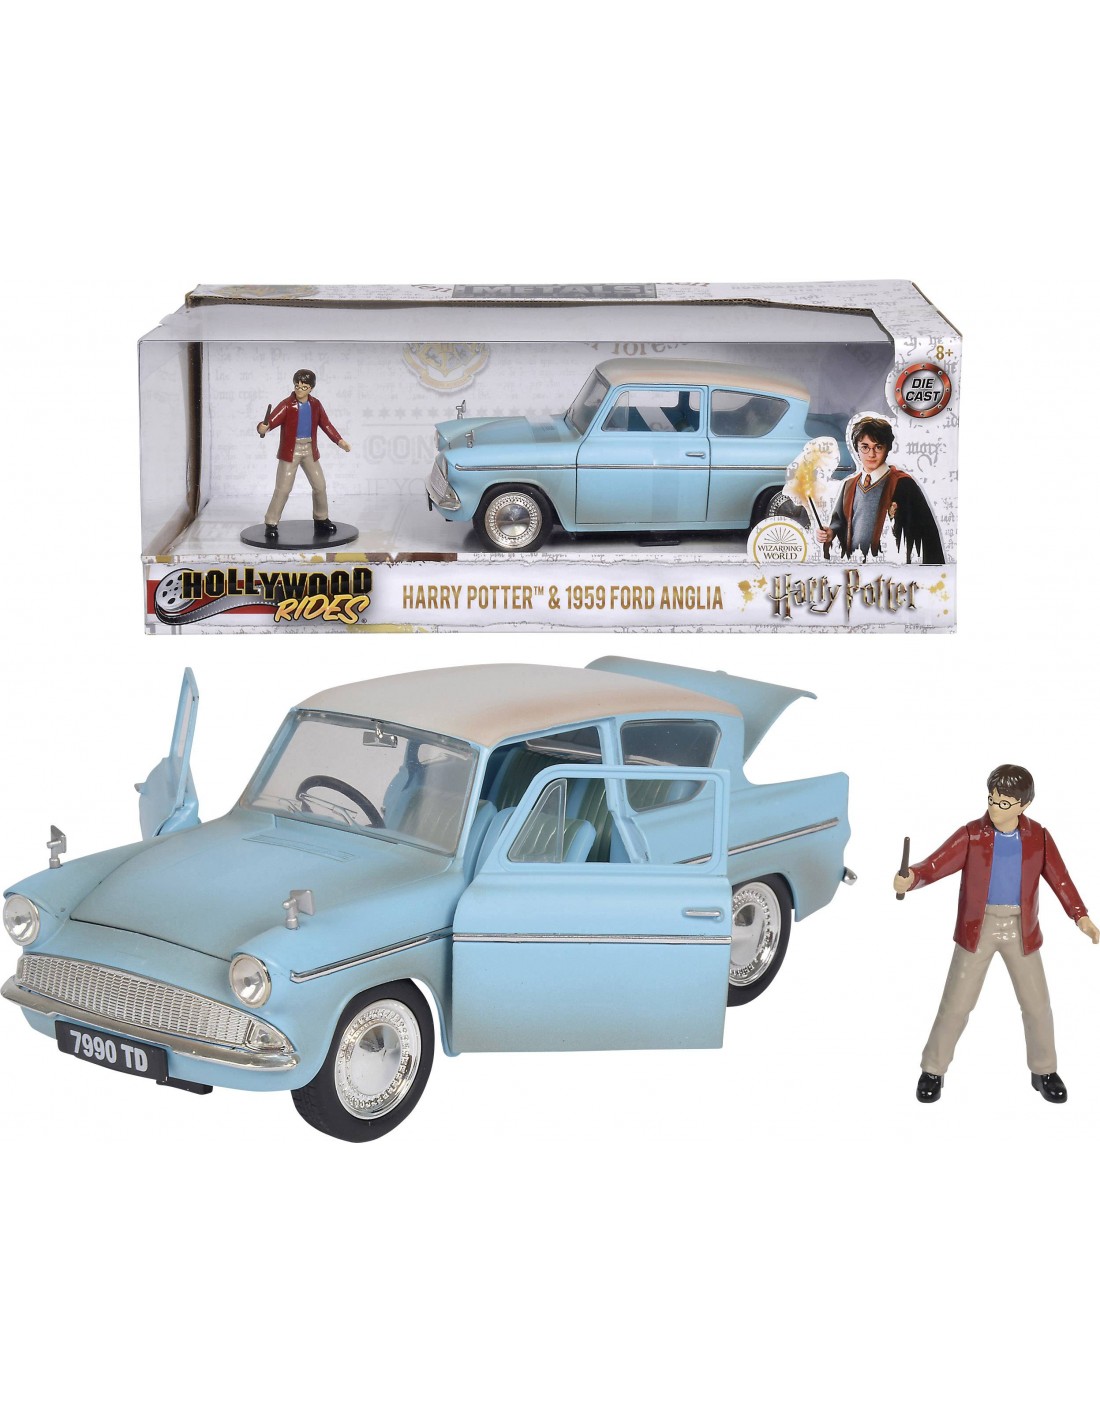 HARRY POTTER Hollywood Rides 1959 Ford Anglia-cast giocattolo Die auto con Harry DIE 